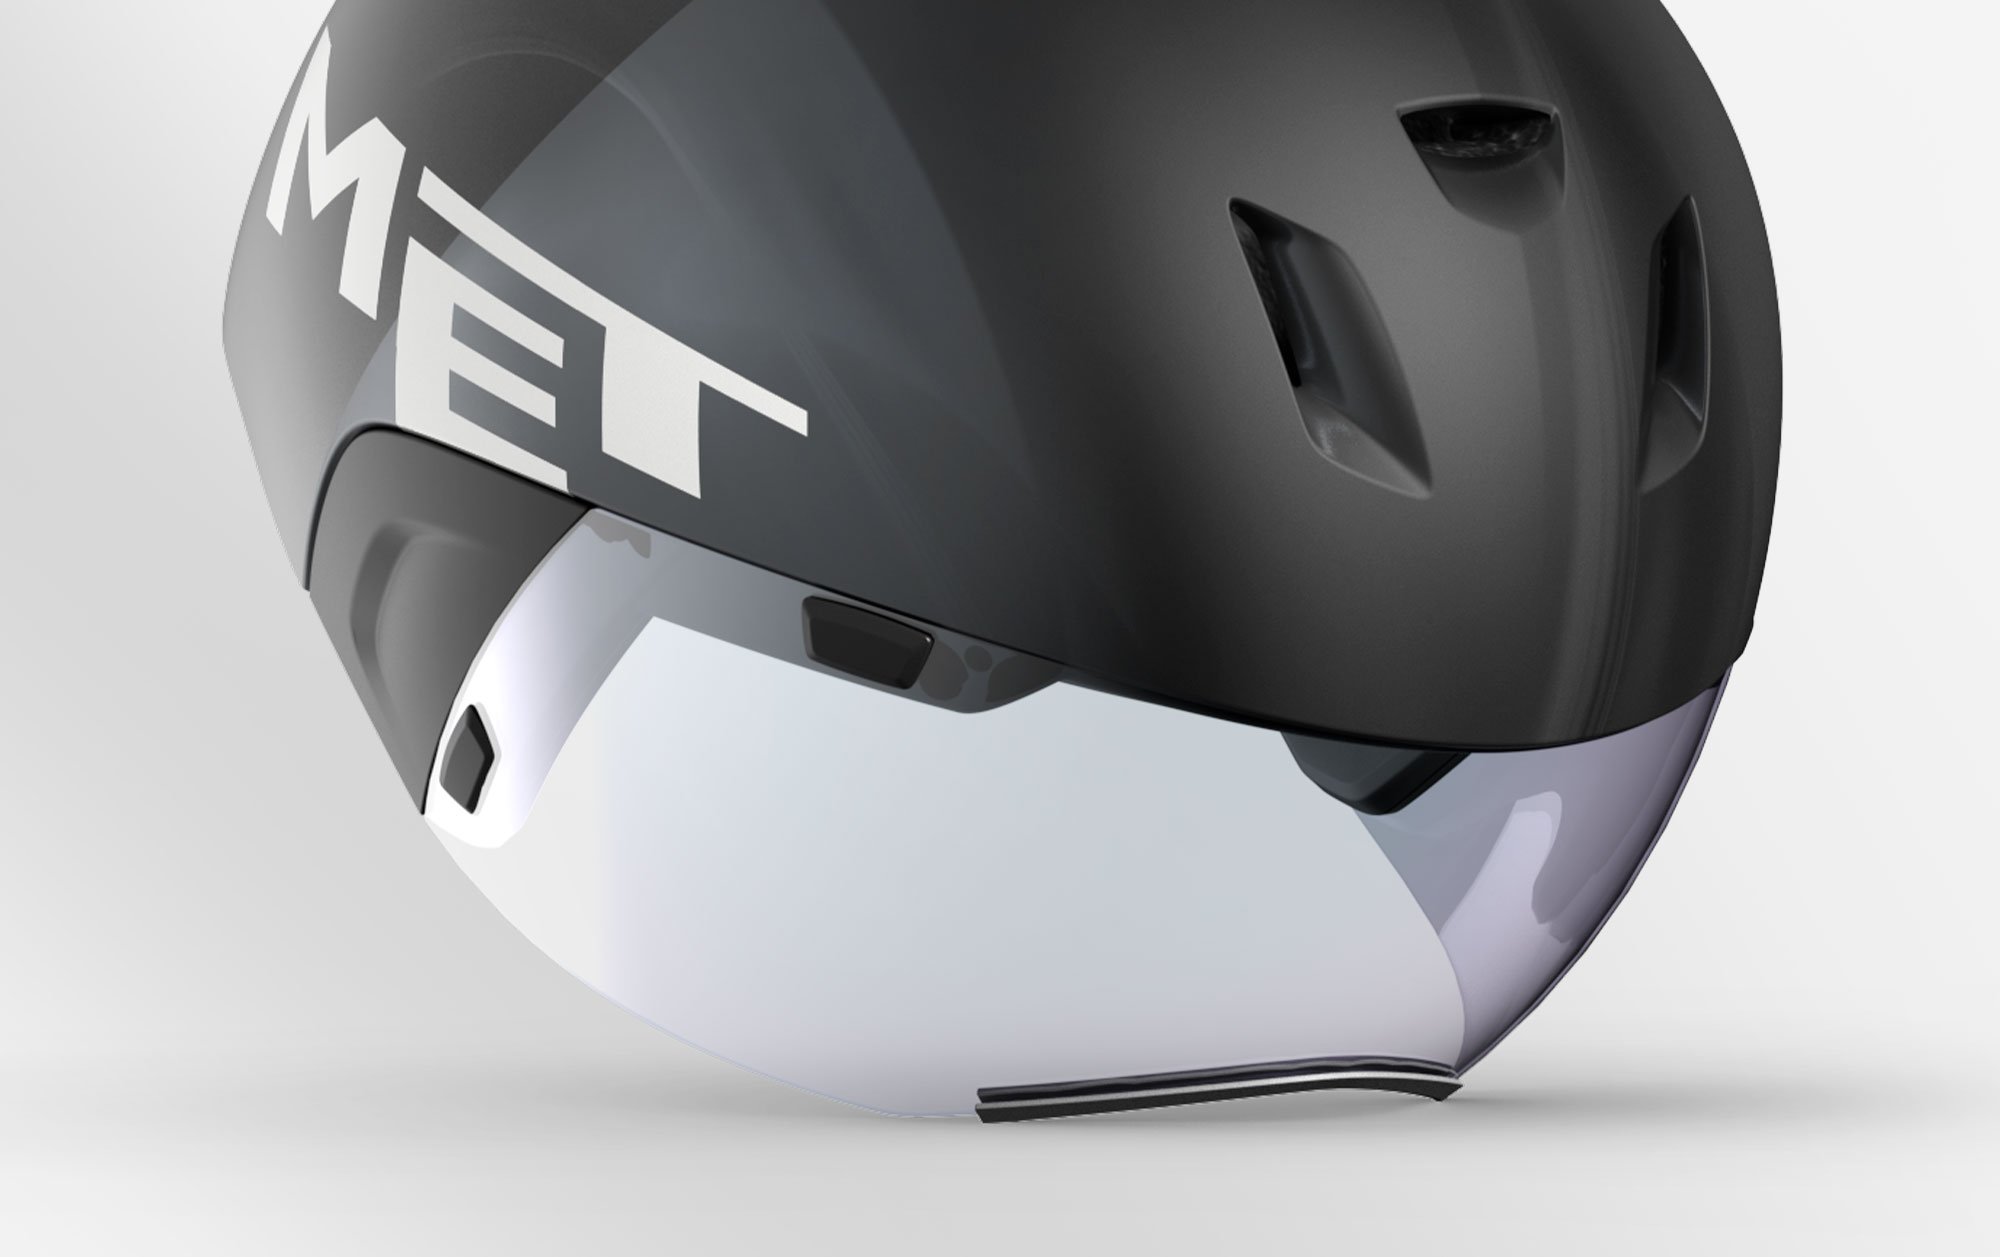 MET Codatronca is an Aero Helmet for Triathlon and Time Trial with Low Dra Inlets